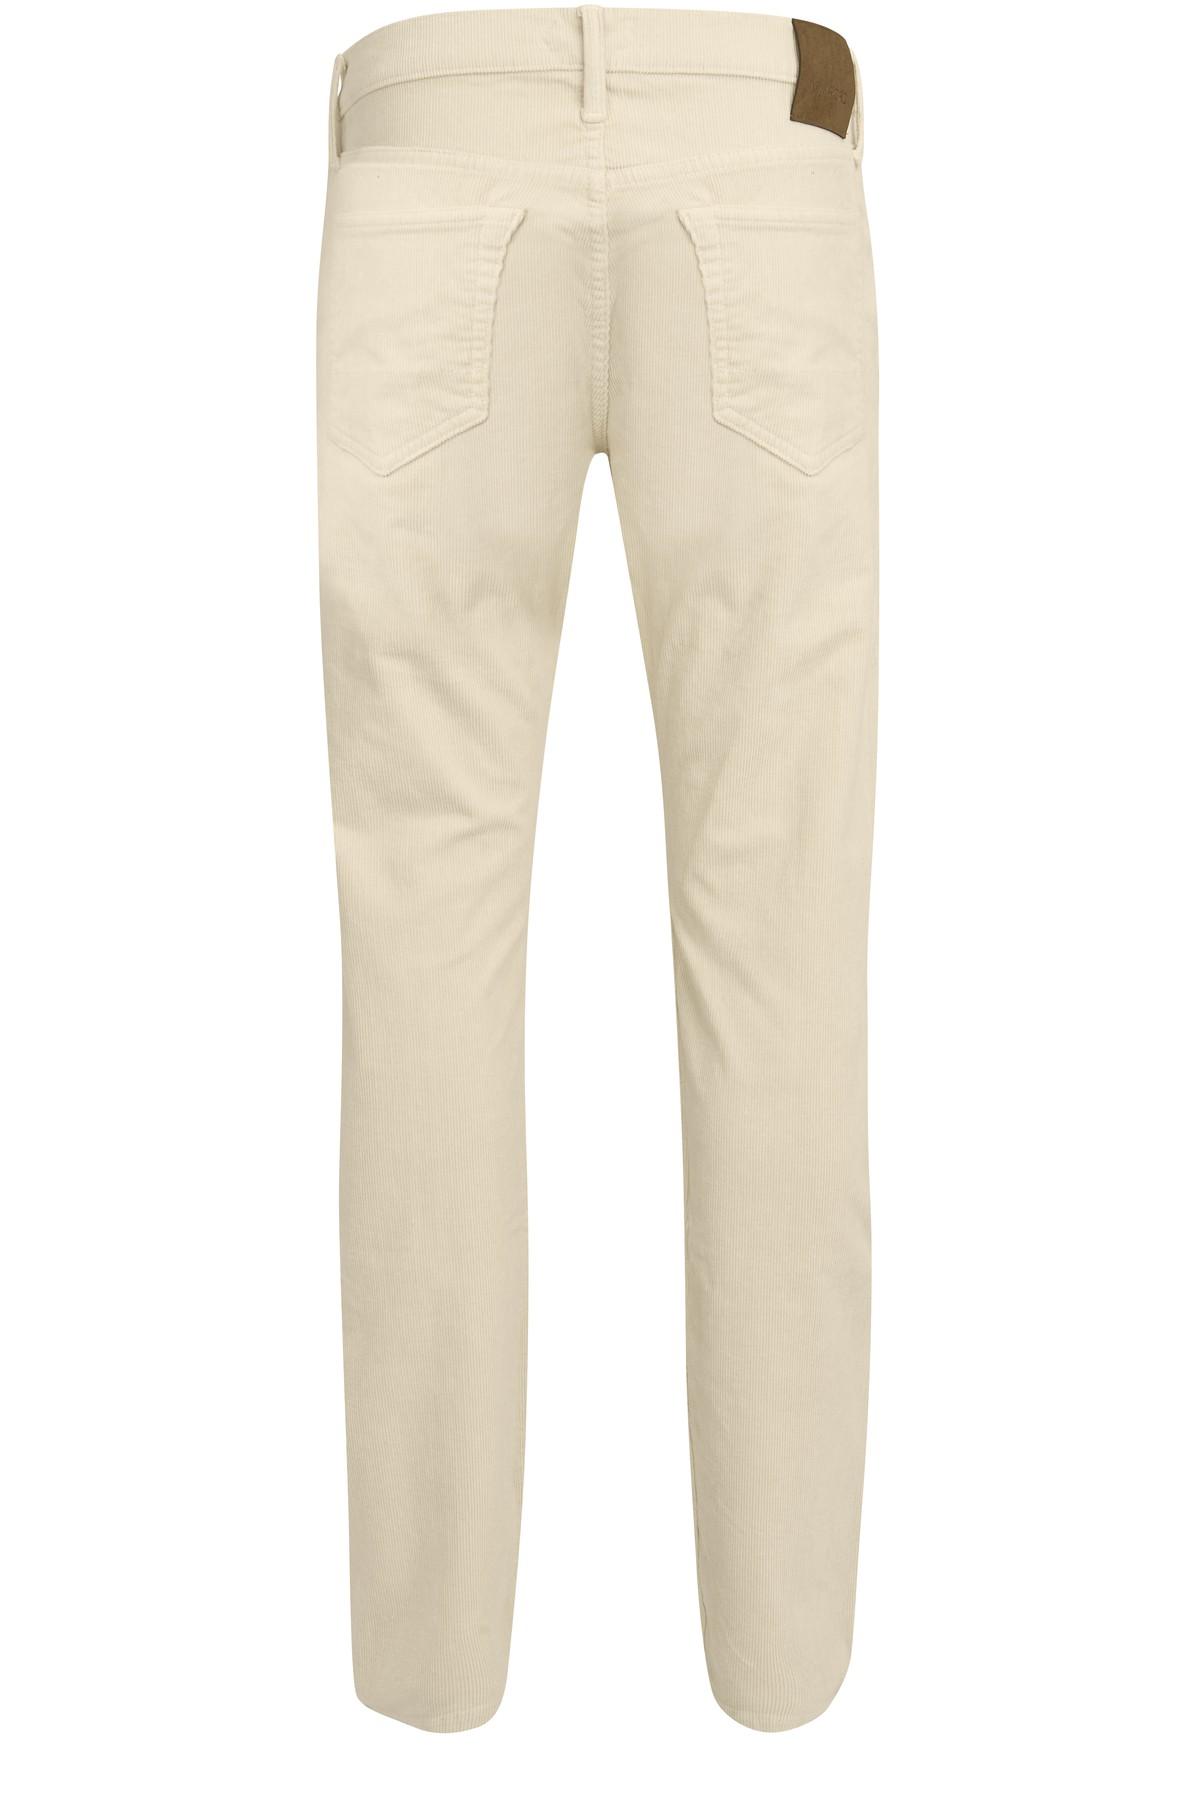 Tom Ford Washed Corduroy Stretch Straight Pants in Natural for Men - Lyst